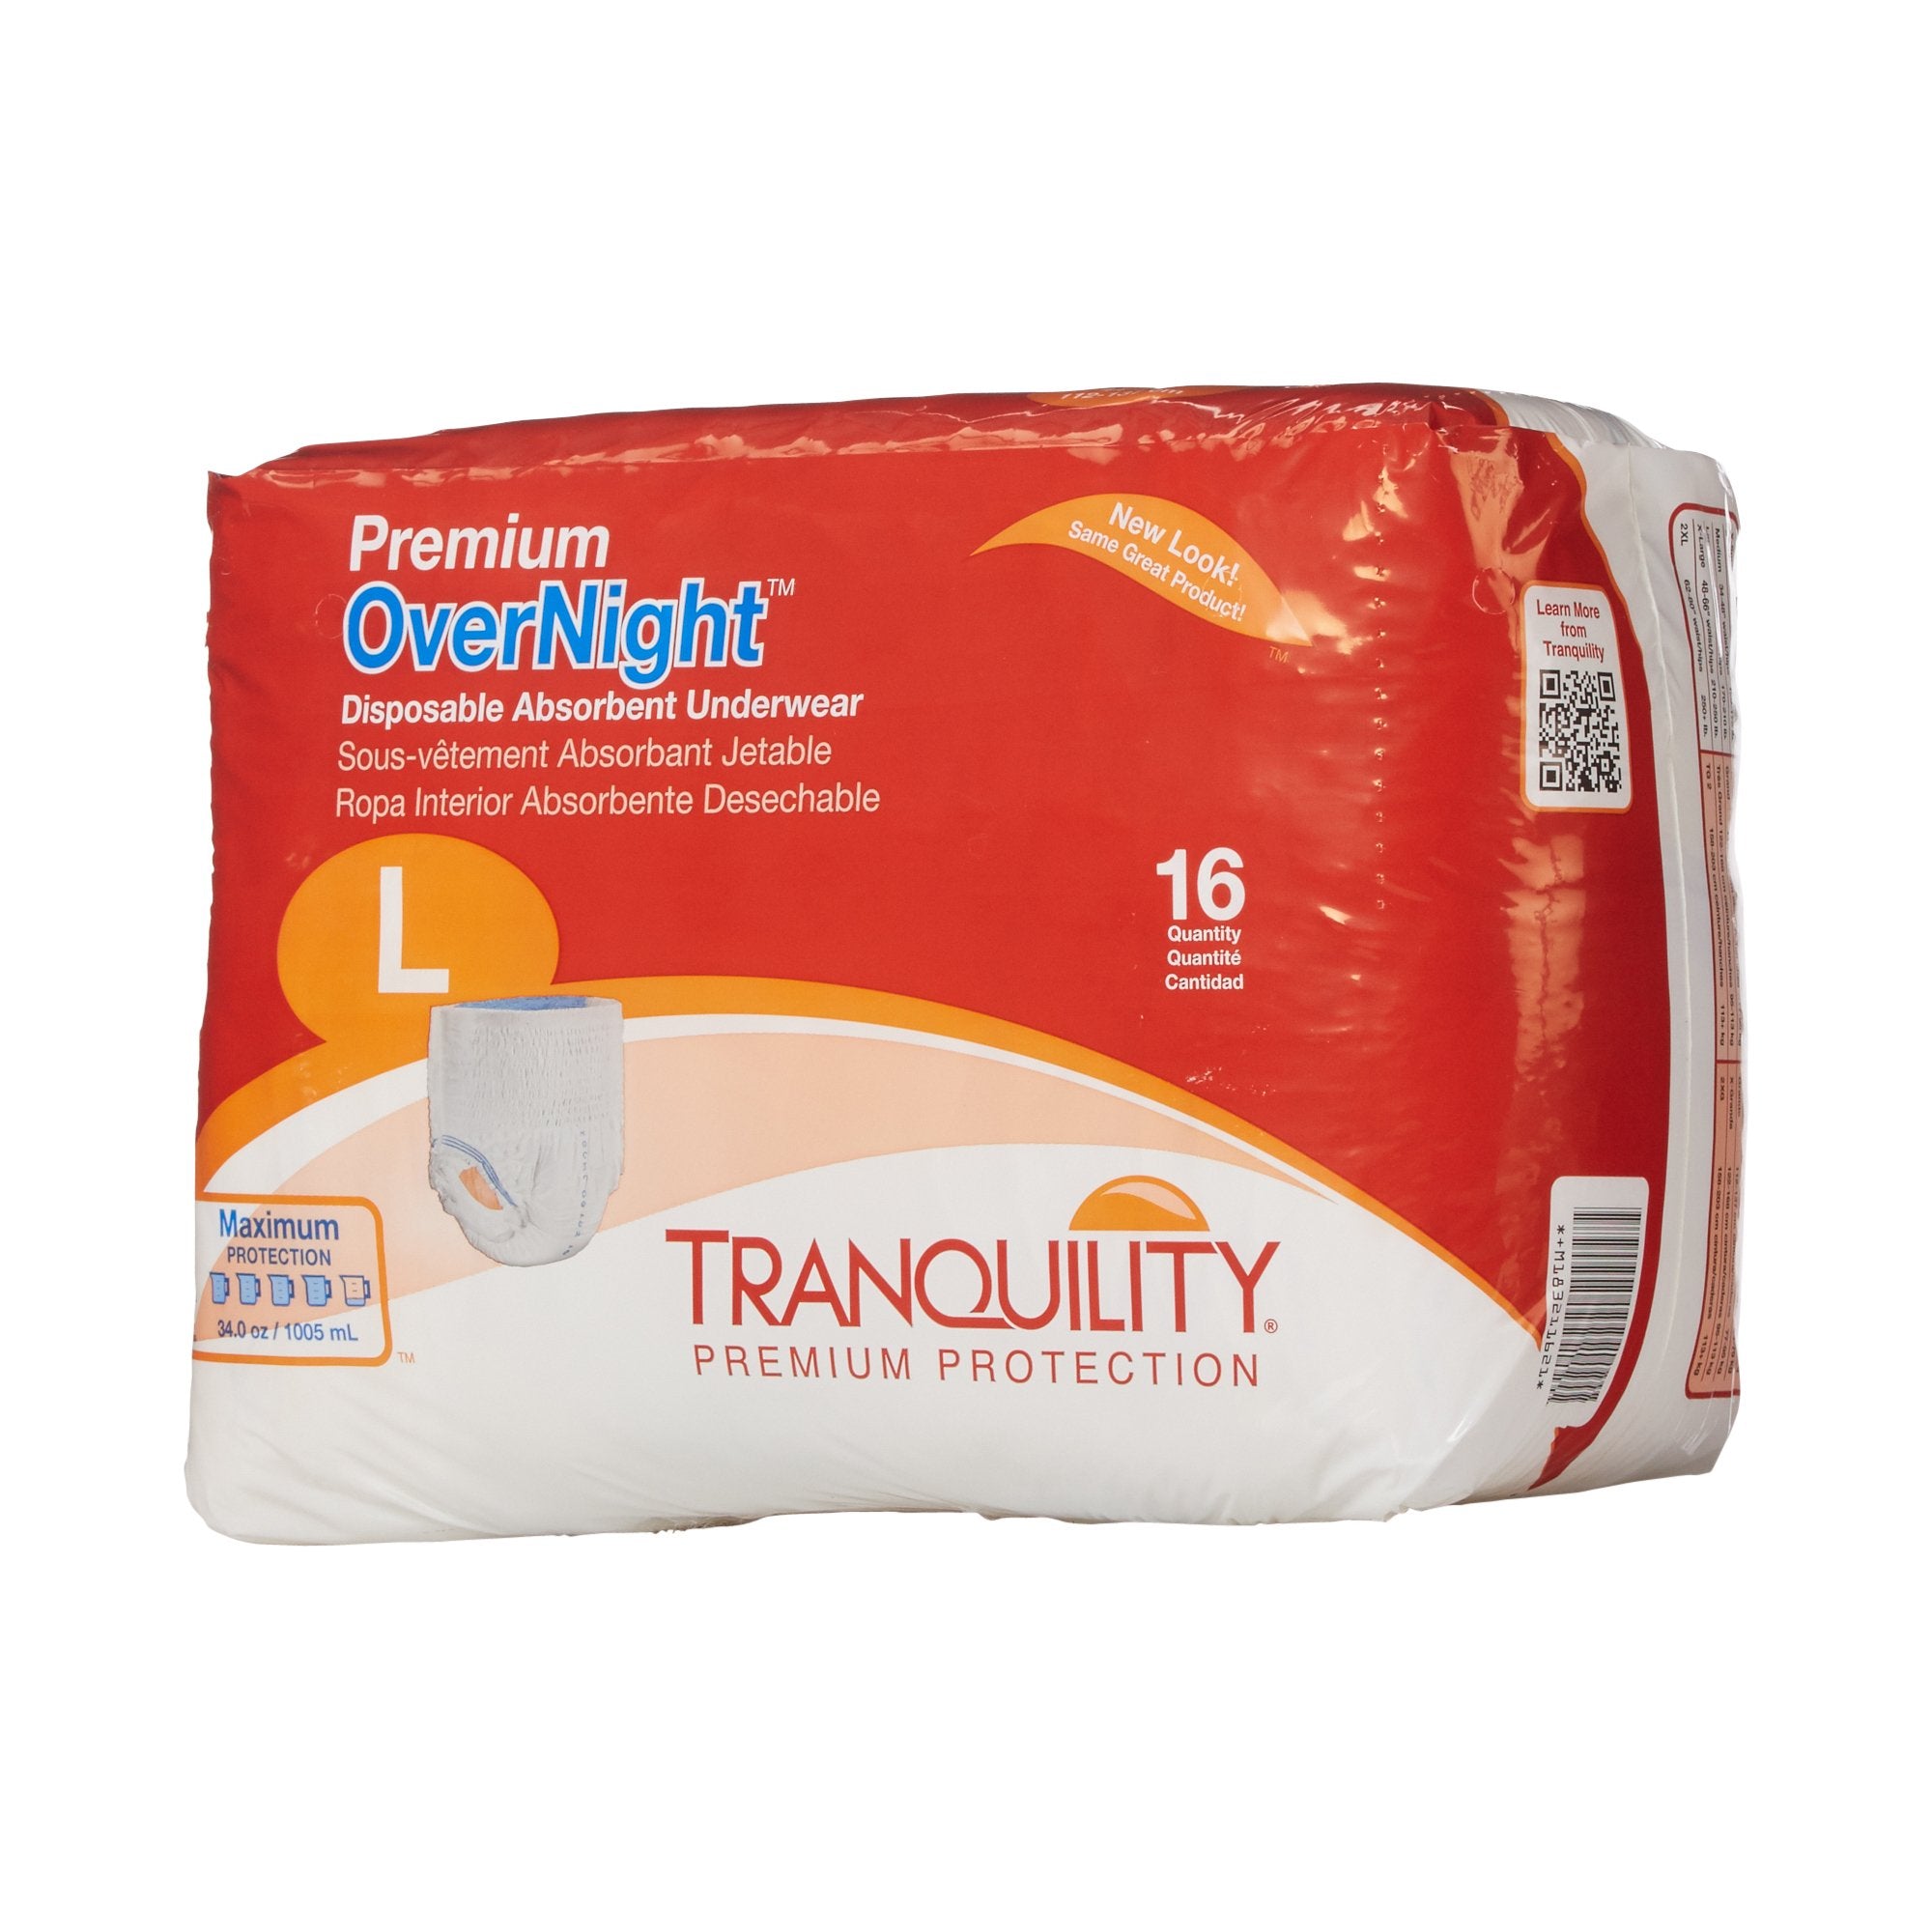 Unisex Adult Absorbent Underwear Tranquility Premium OverNight Pull On with Tear Away Seams Large Disposable Heavy Absorbency